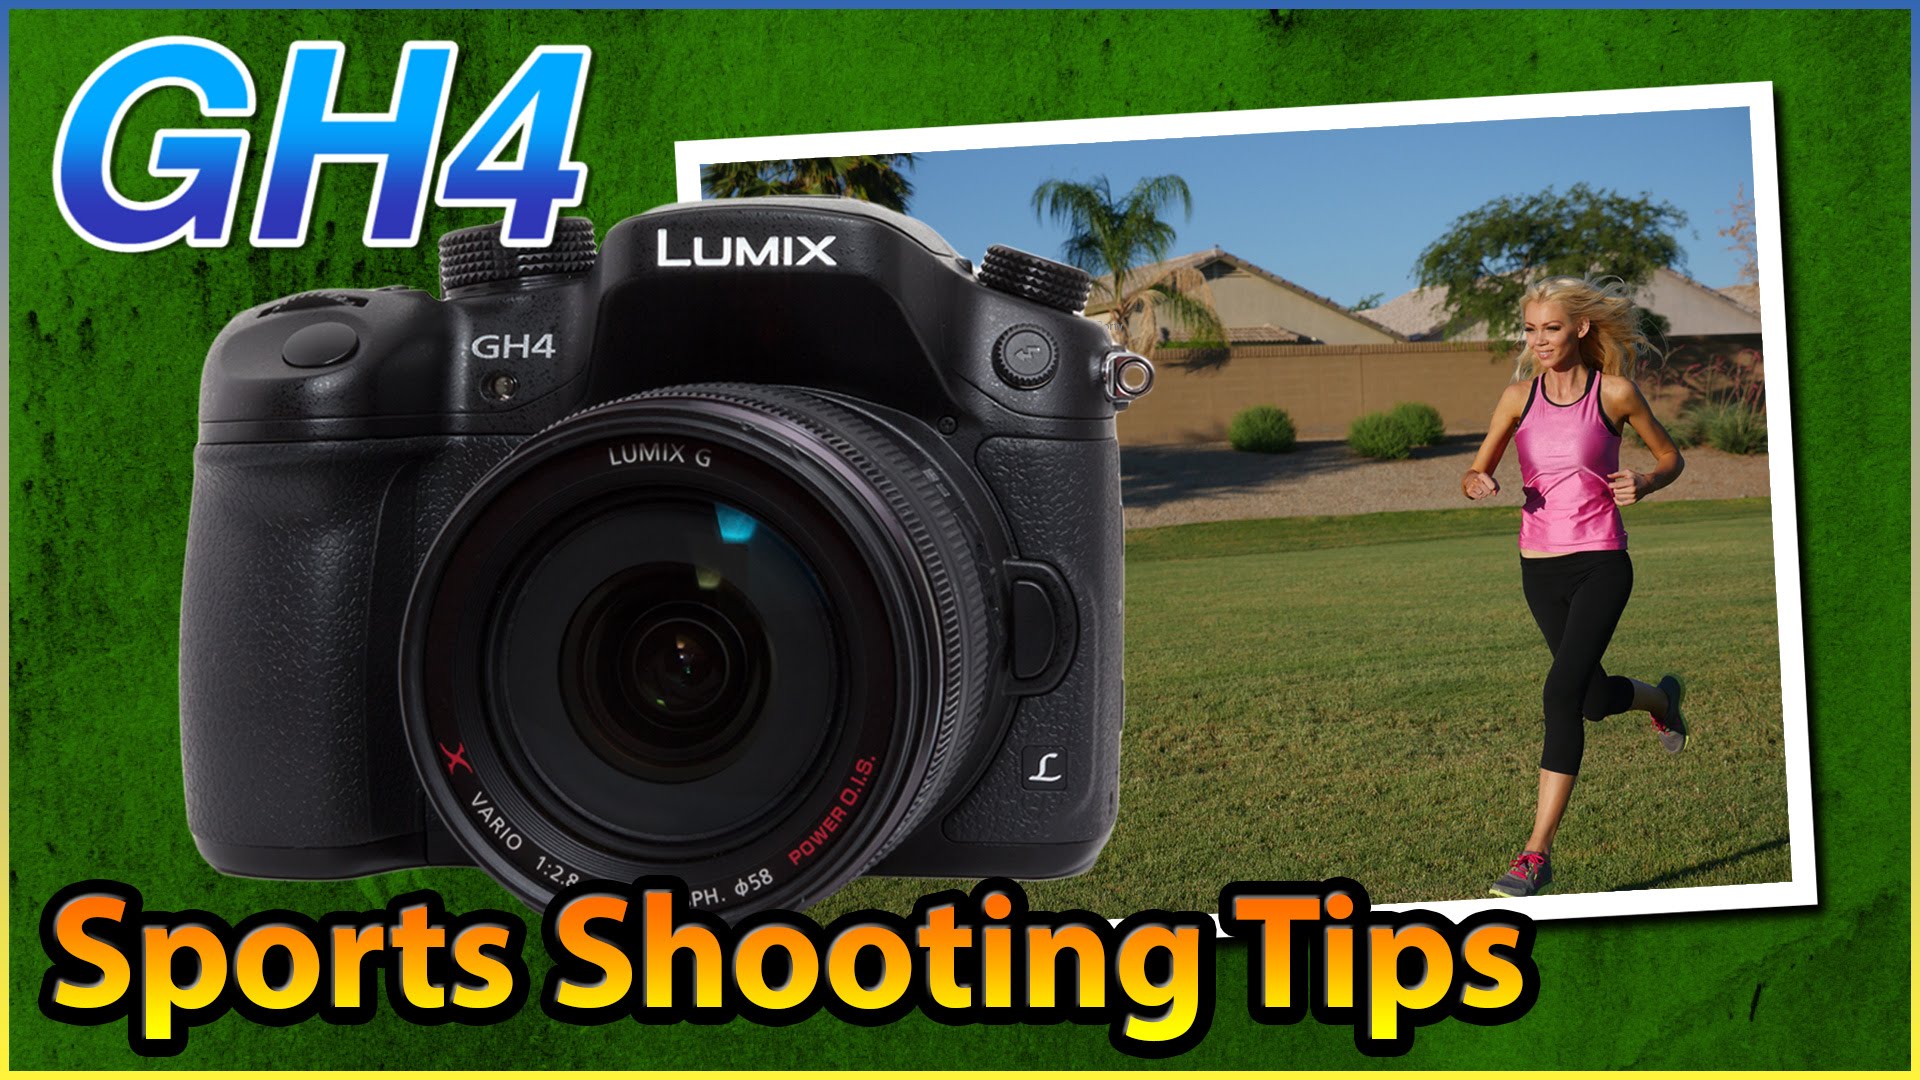 GH4 Tutorial | Focusing & Set Up for Sports Shooting | Training Video